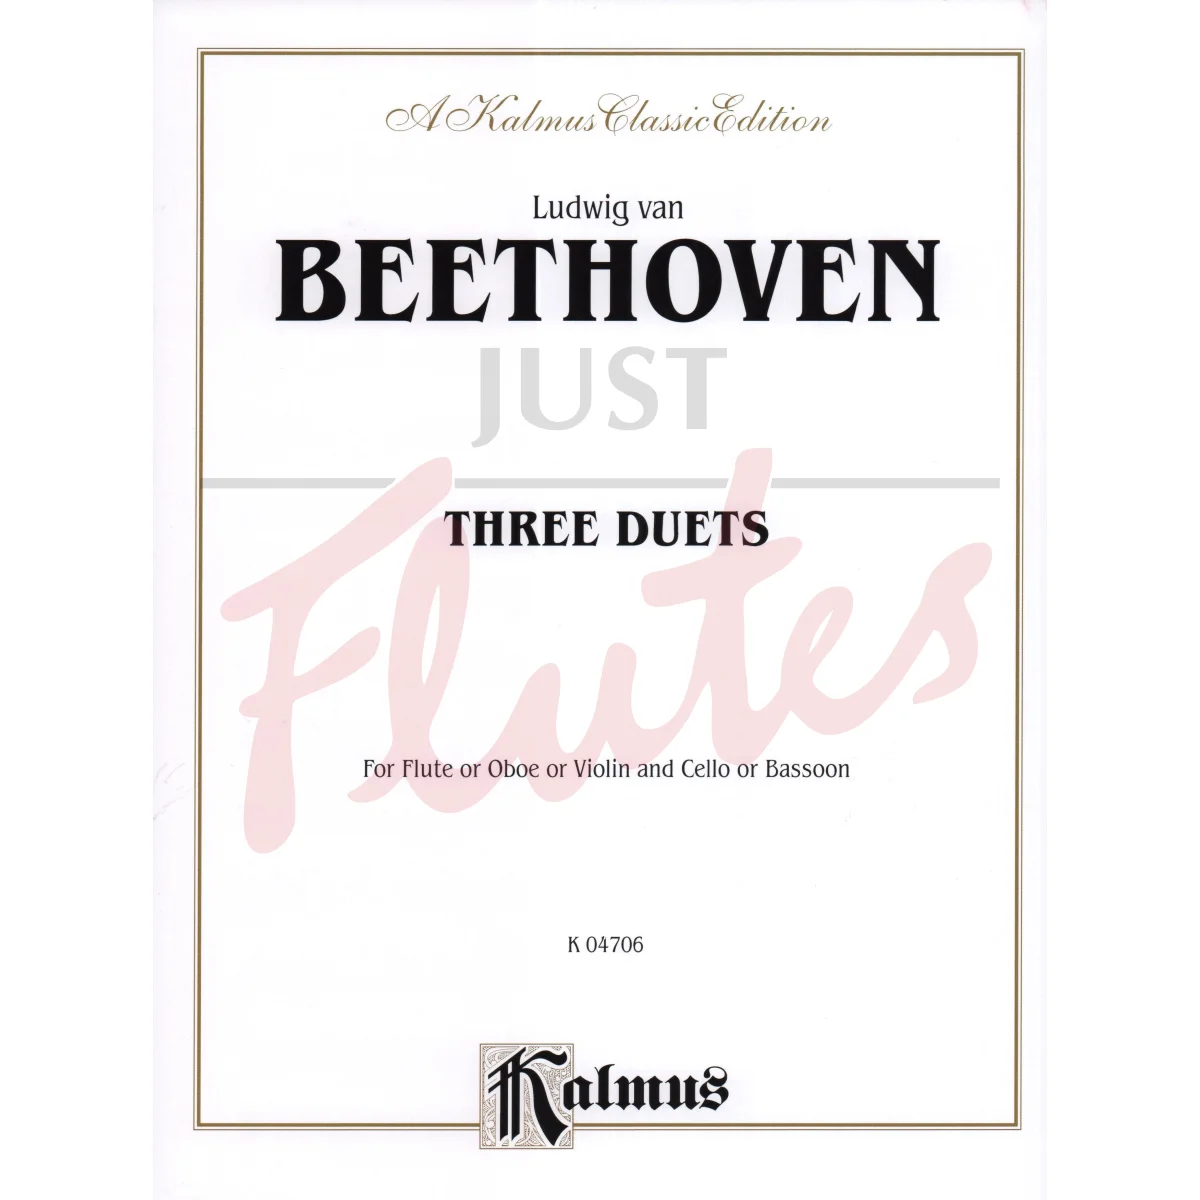 Three Duets for Flute and Cello/Bassoon